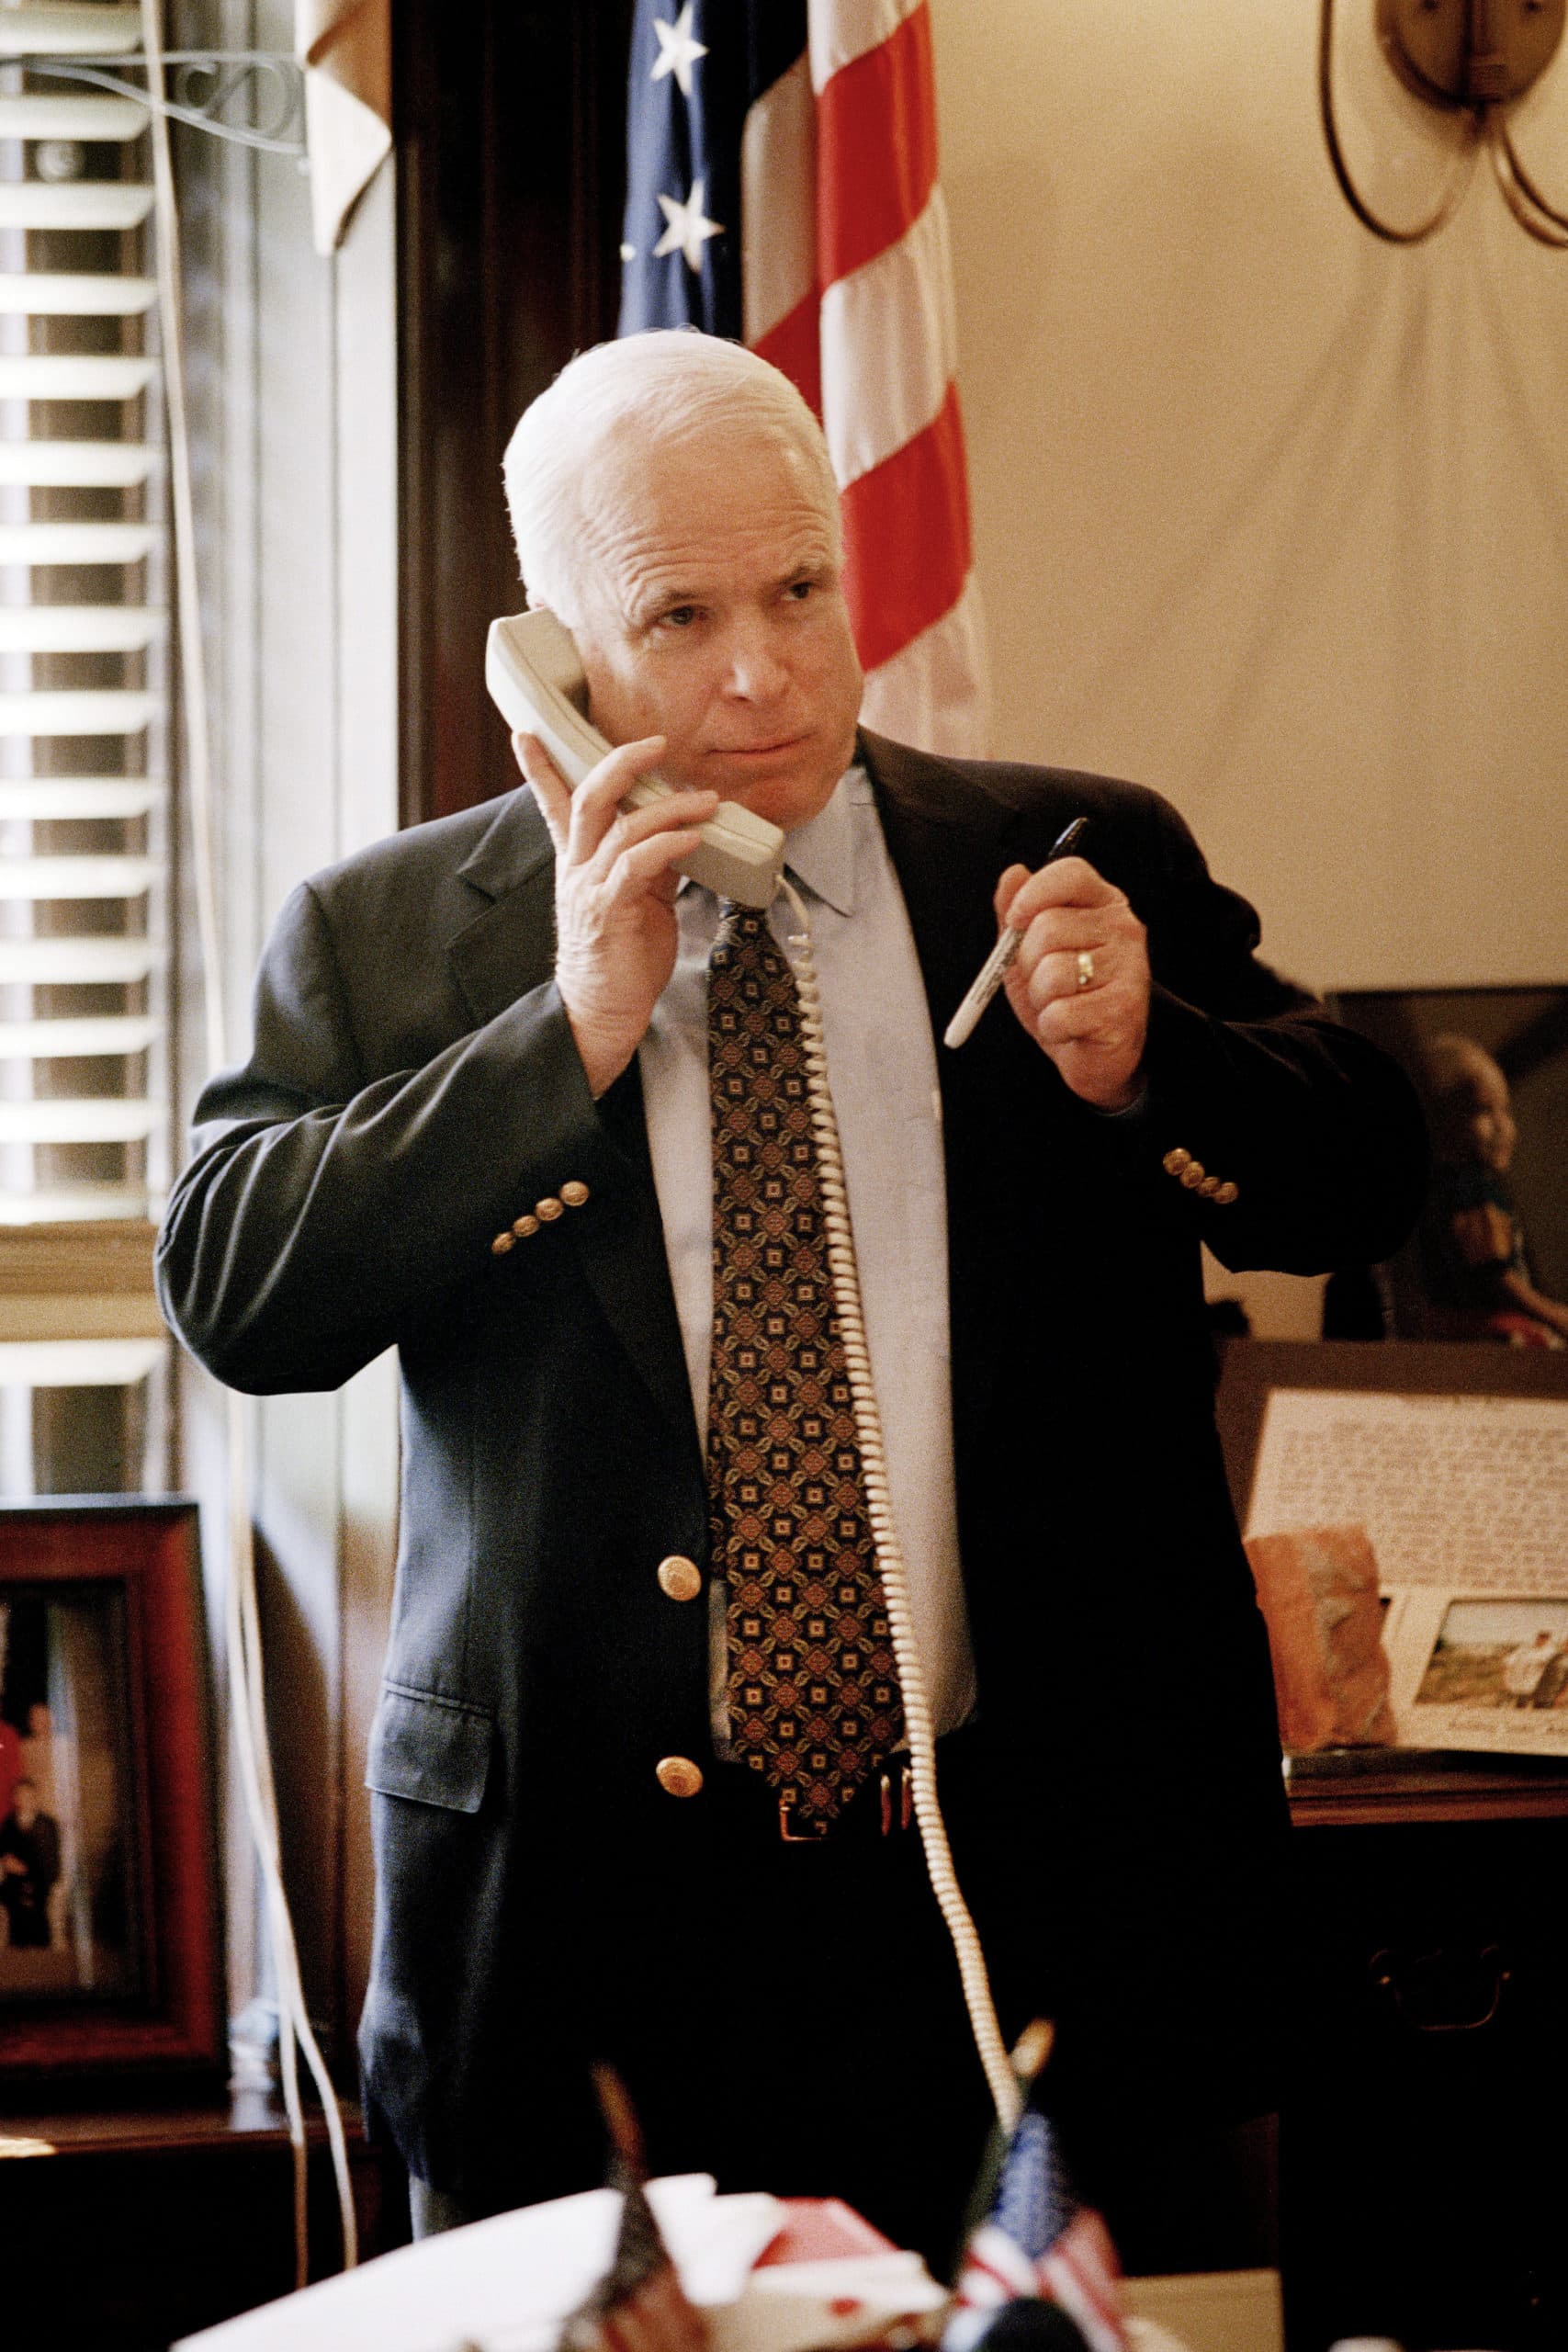 WASHINGTON, DC - JULY 19: (NO U.S. TABLOID SALES) Senator John McCain on the phone in his office in Washington, DC July 10, 2001. (Photo by David Hume Kennerly/ Getty Images)